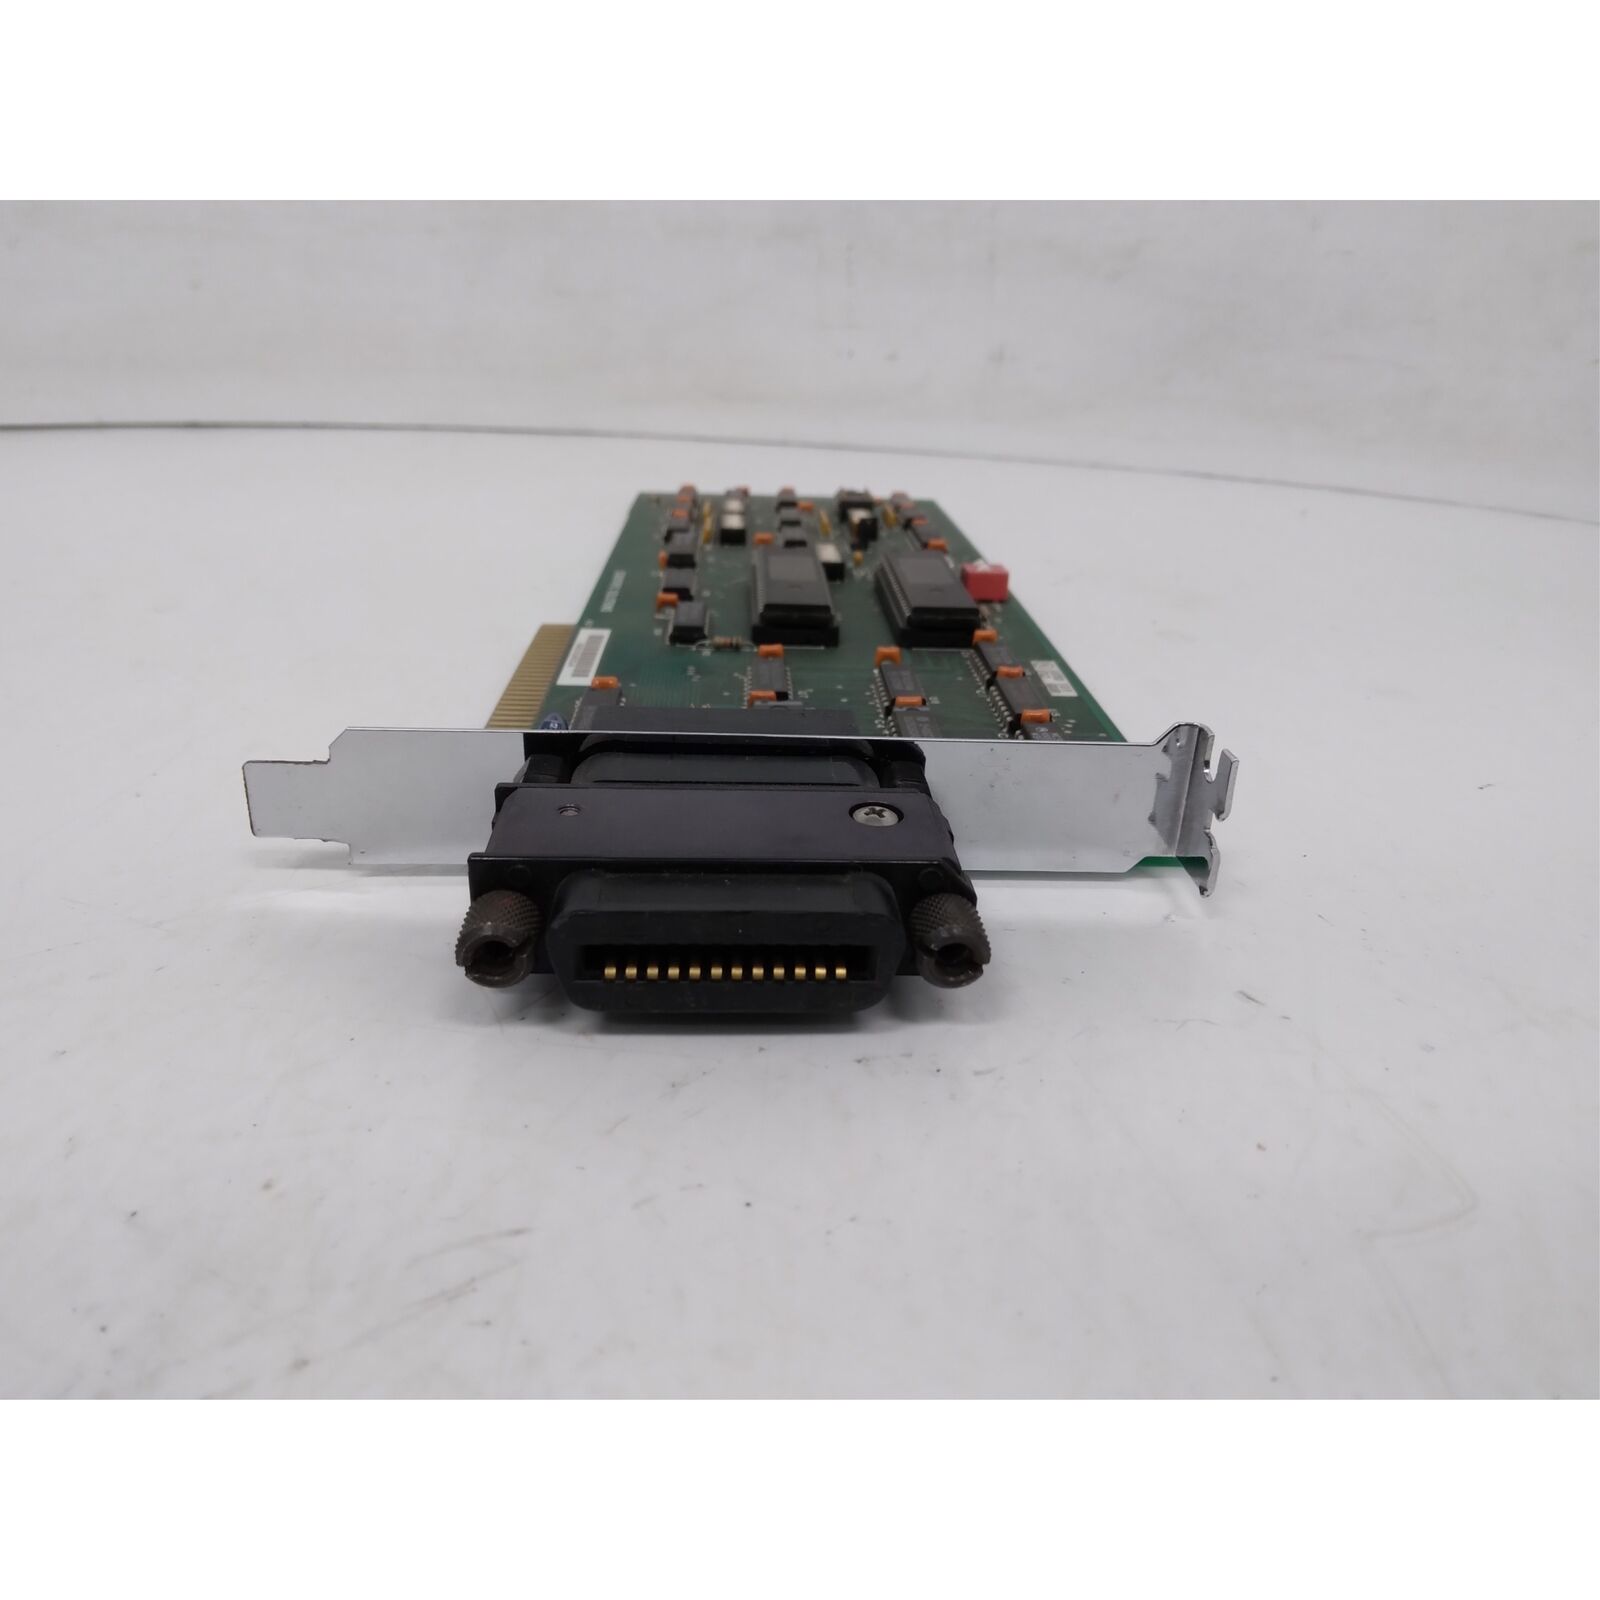 Scientific Solutions IEEE 488 934739 Rev. A Interface Card